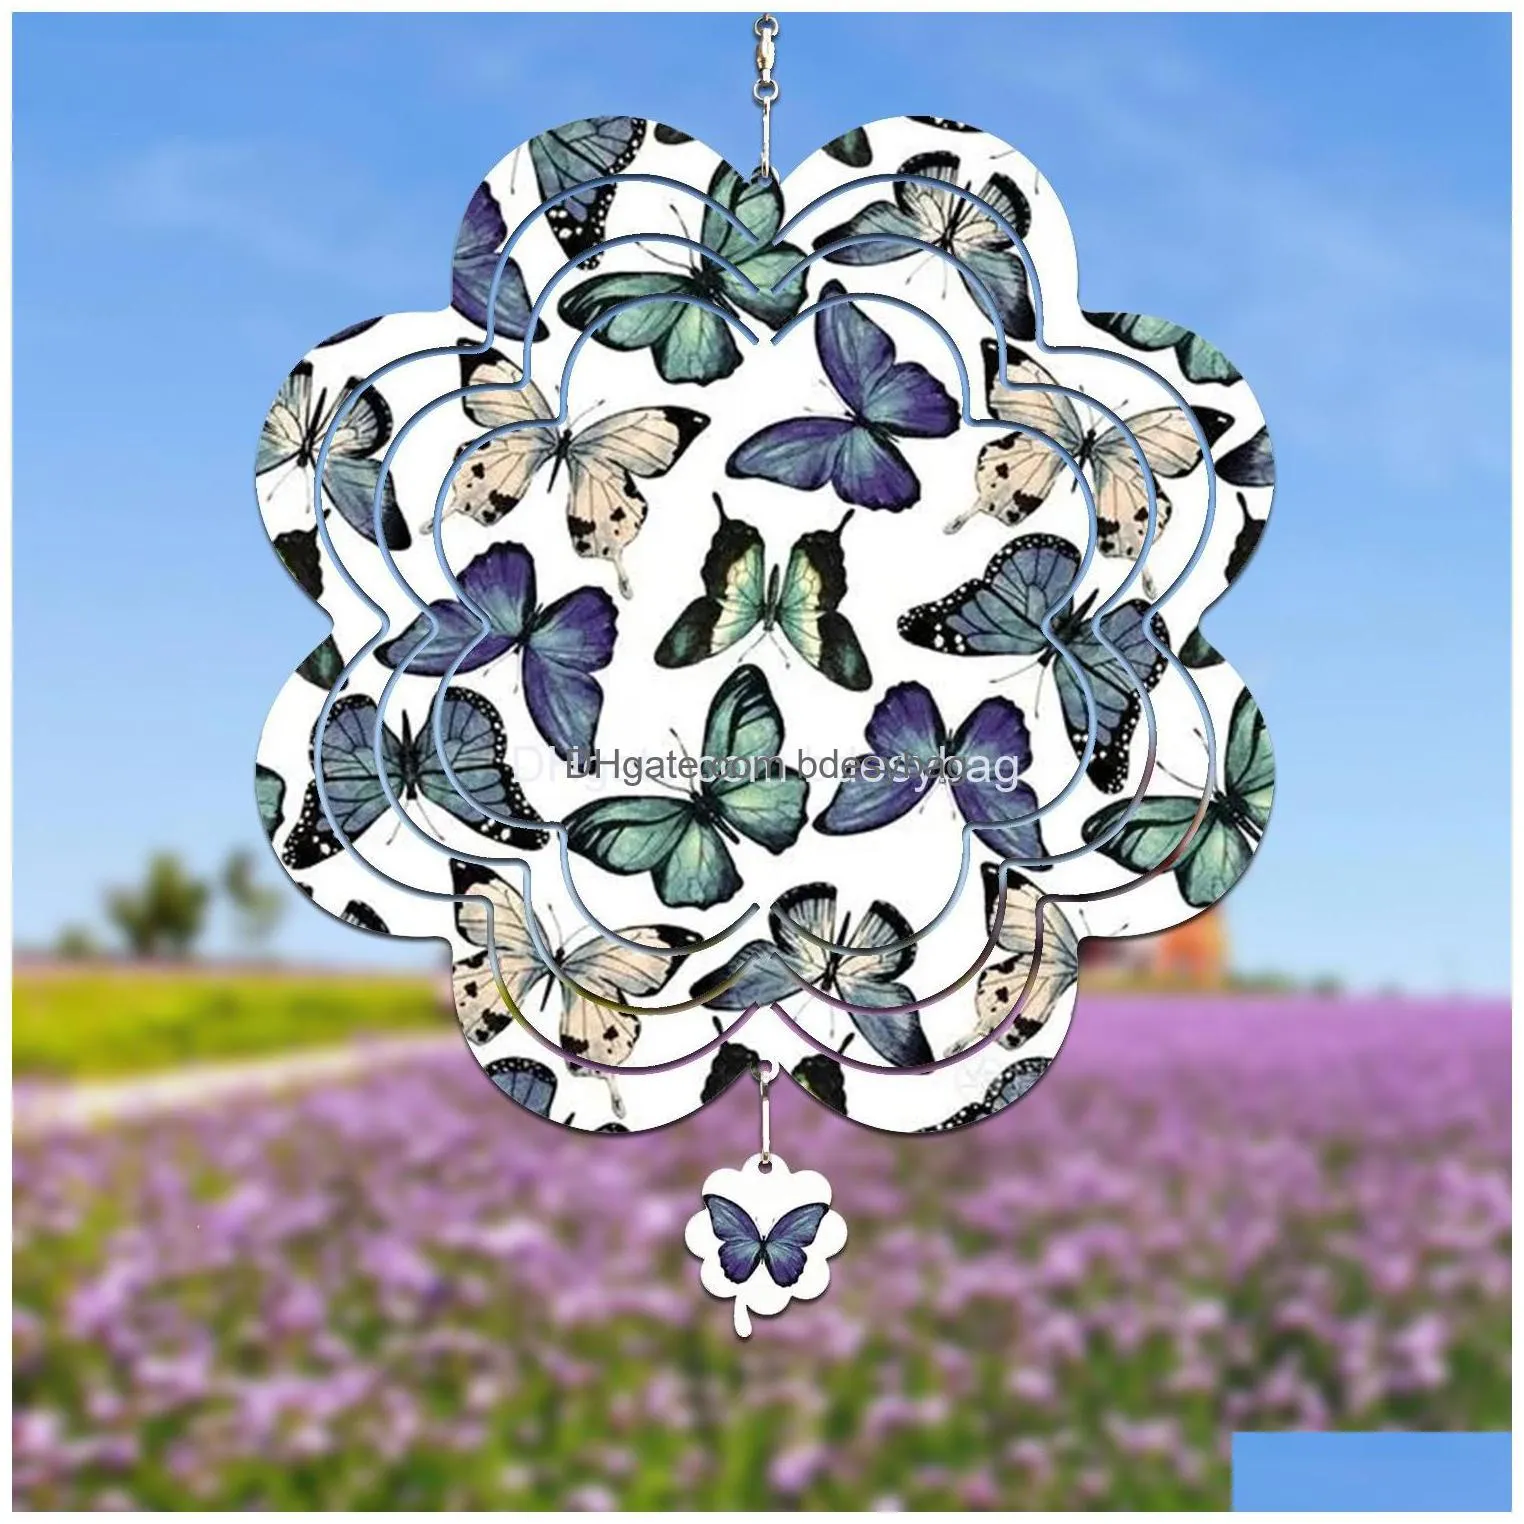 sublimation blank 3d wind spinners alluminum large flower shape spinning hanging patio yard decoration blanks for diy both sides